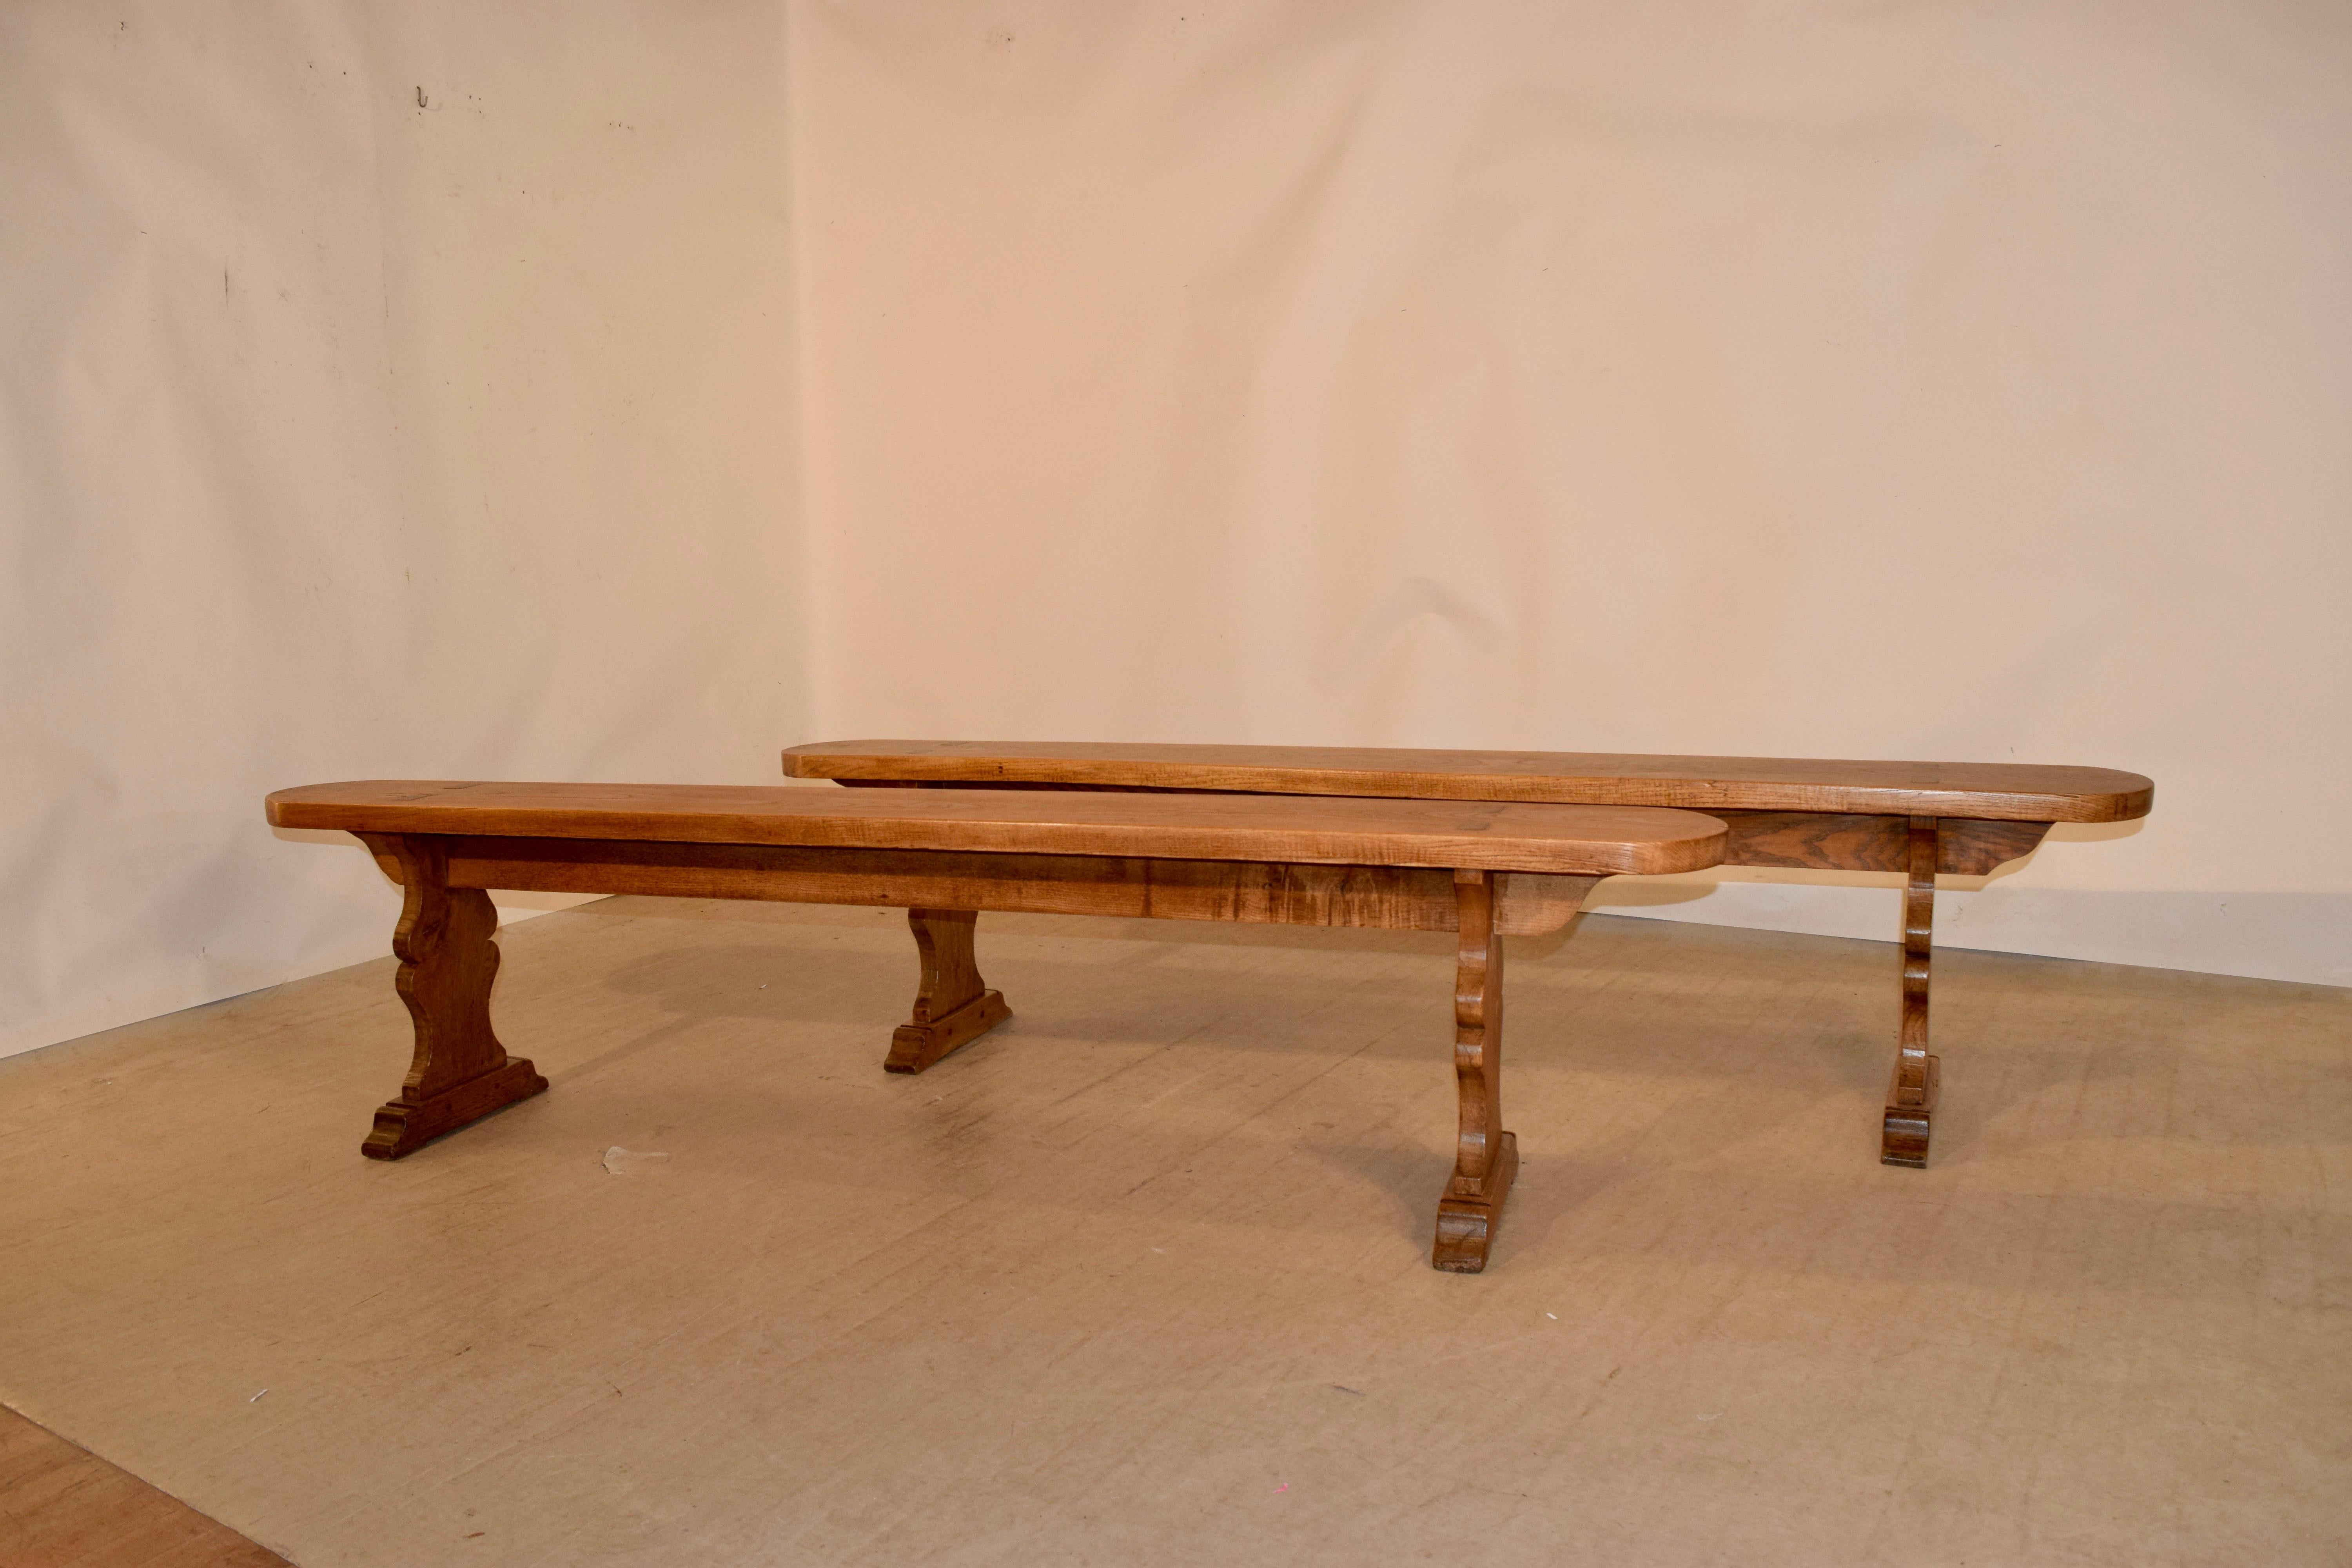 Pair of 19th century elm benches from France with rounded ends and vase shaped pedestal legs, ending in hand shaped feet. The seats measure 8.88 in depth.